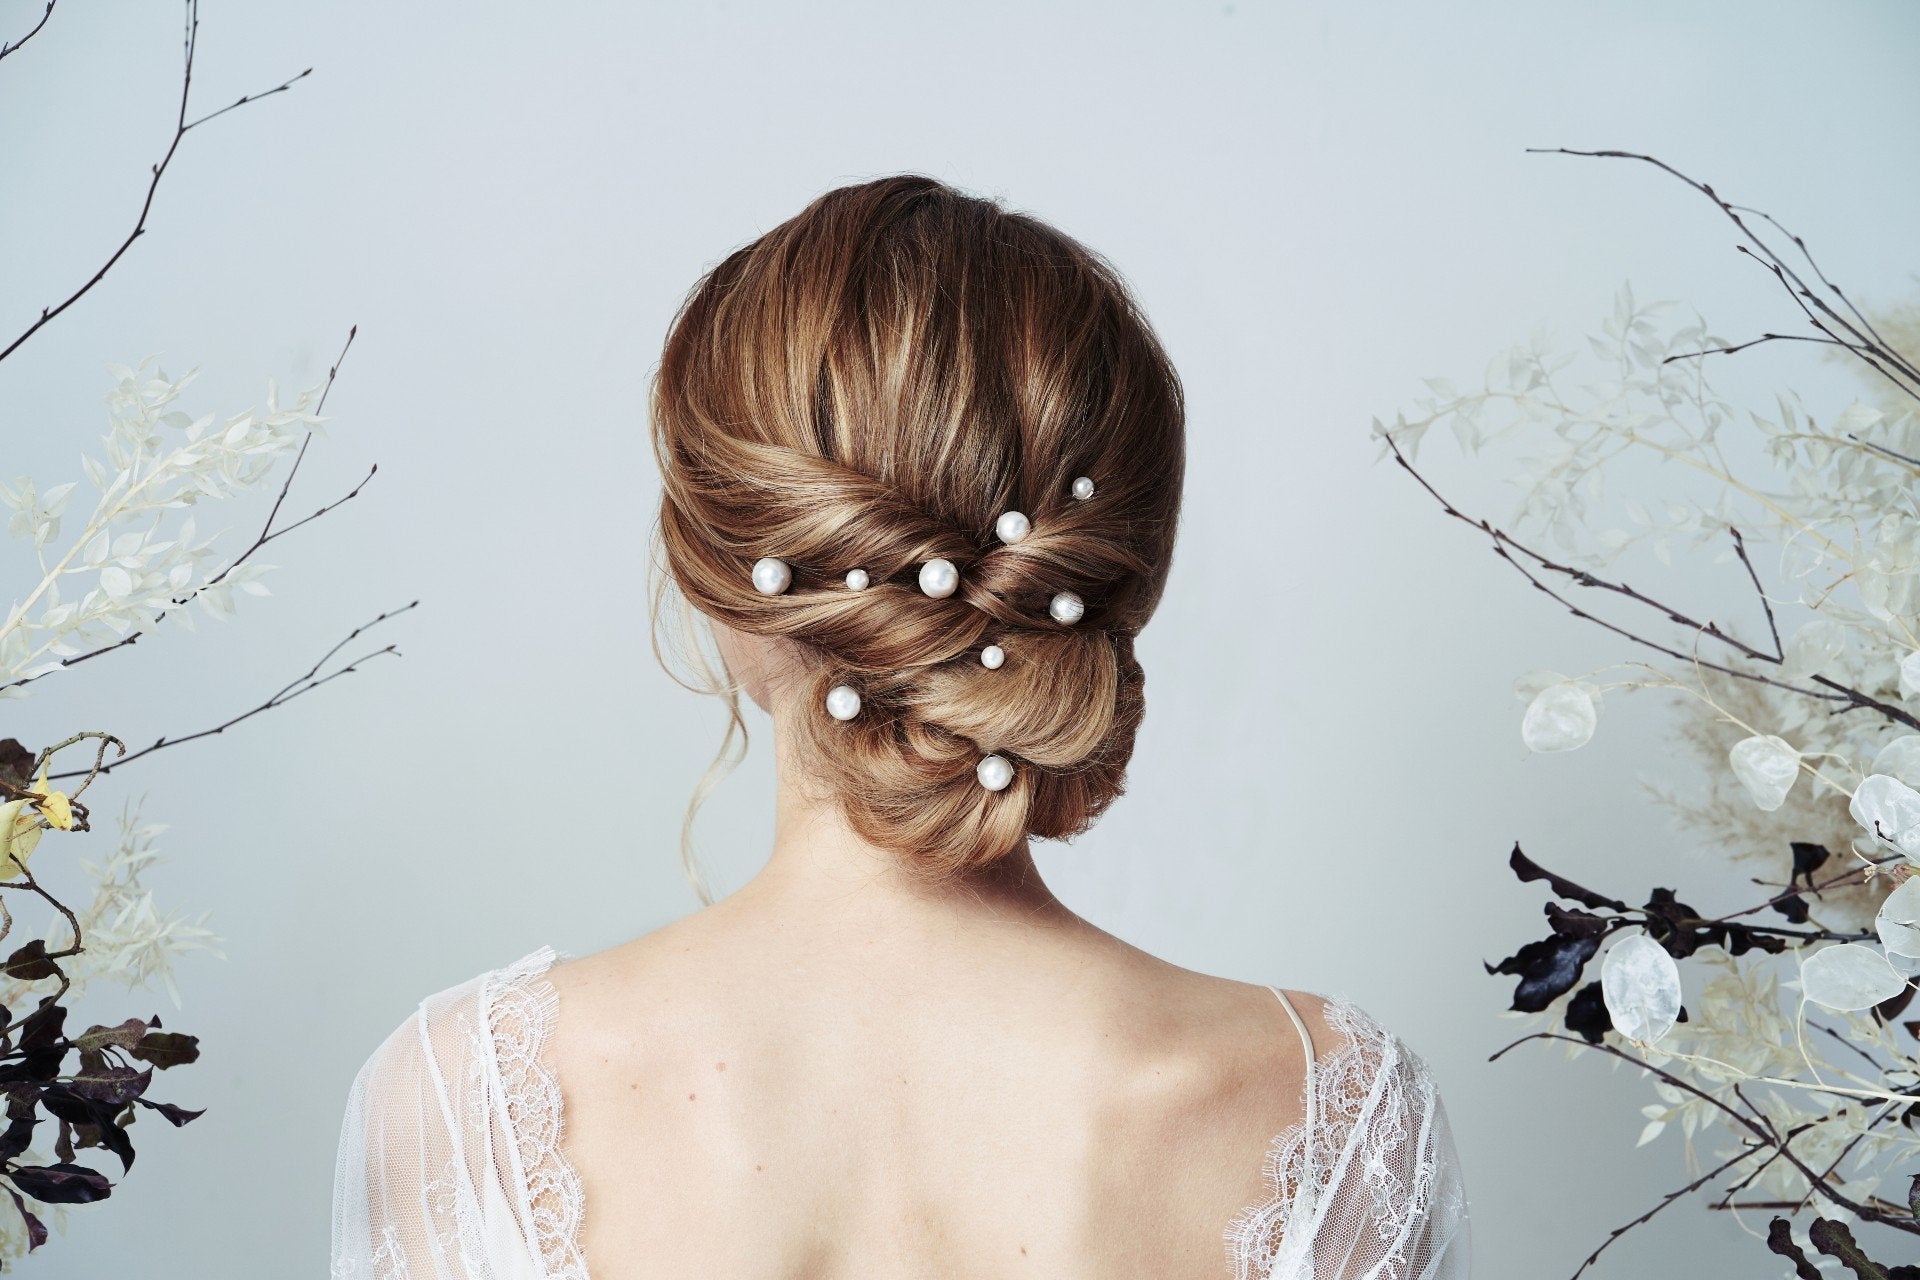 How to shop for your bridal hair accessories - model wears mixed size pearl hairpins scattered through a twisted low bun